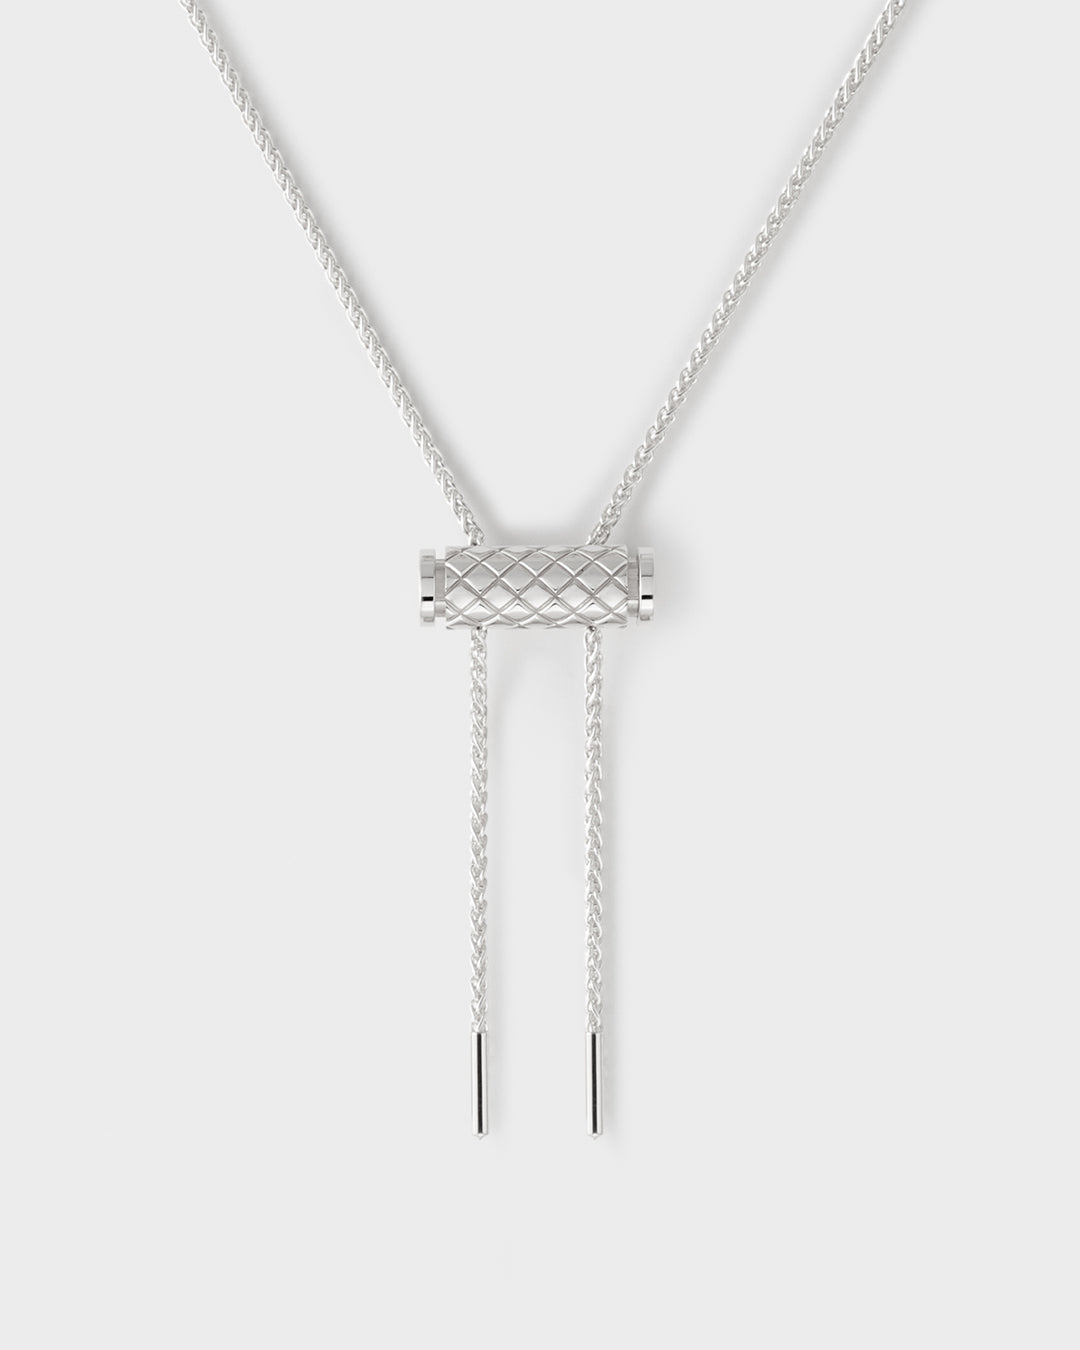 Gold Latch Pendant on MM Chain in White Gold - 1 - Nouvel Heritage